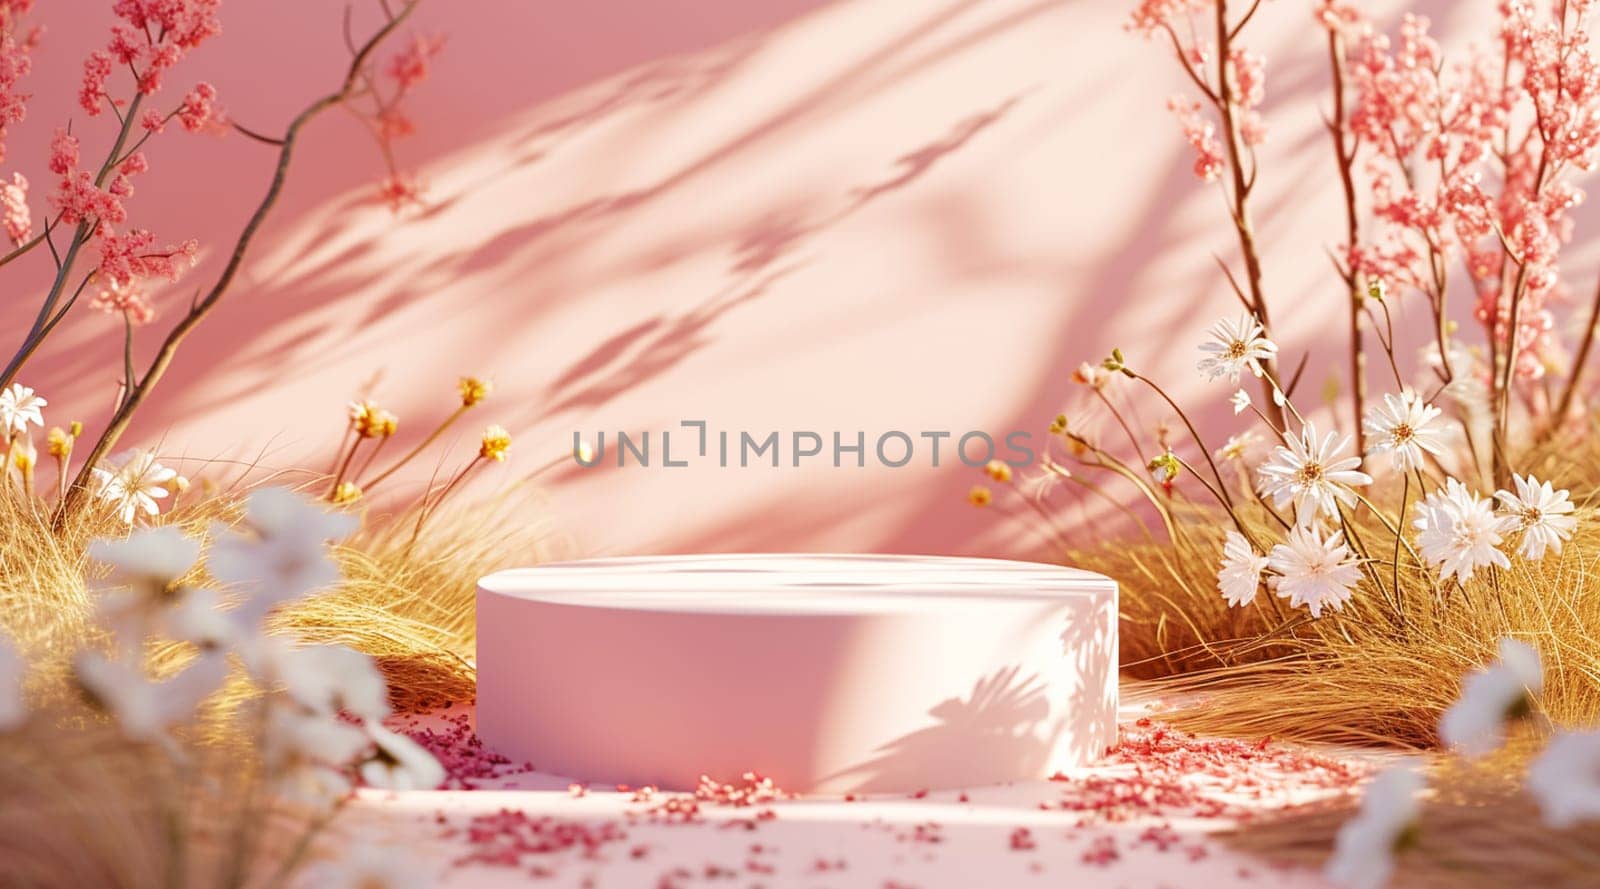 A serene scene with a cylindrical podium amid dried flowers and soft pink hues by kizuneko